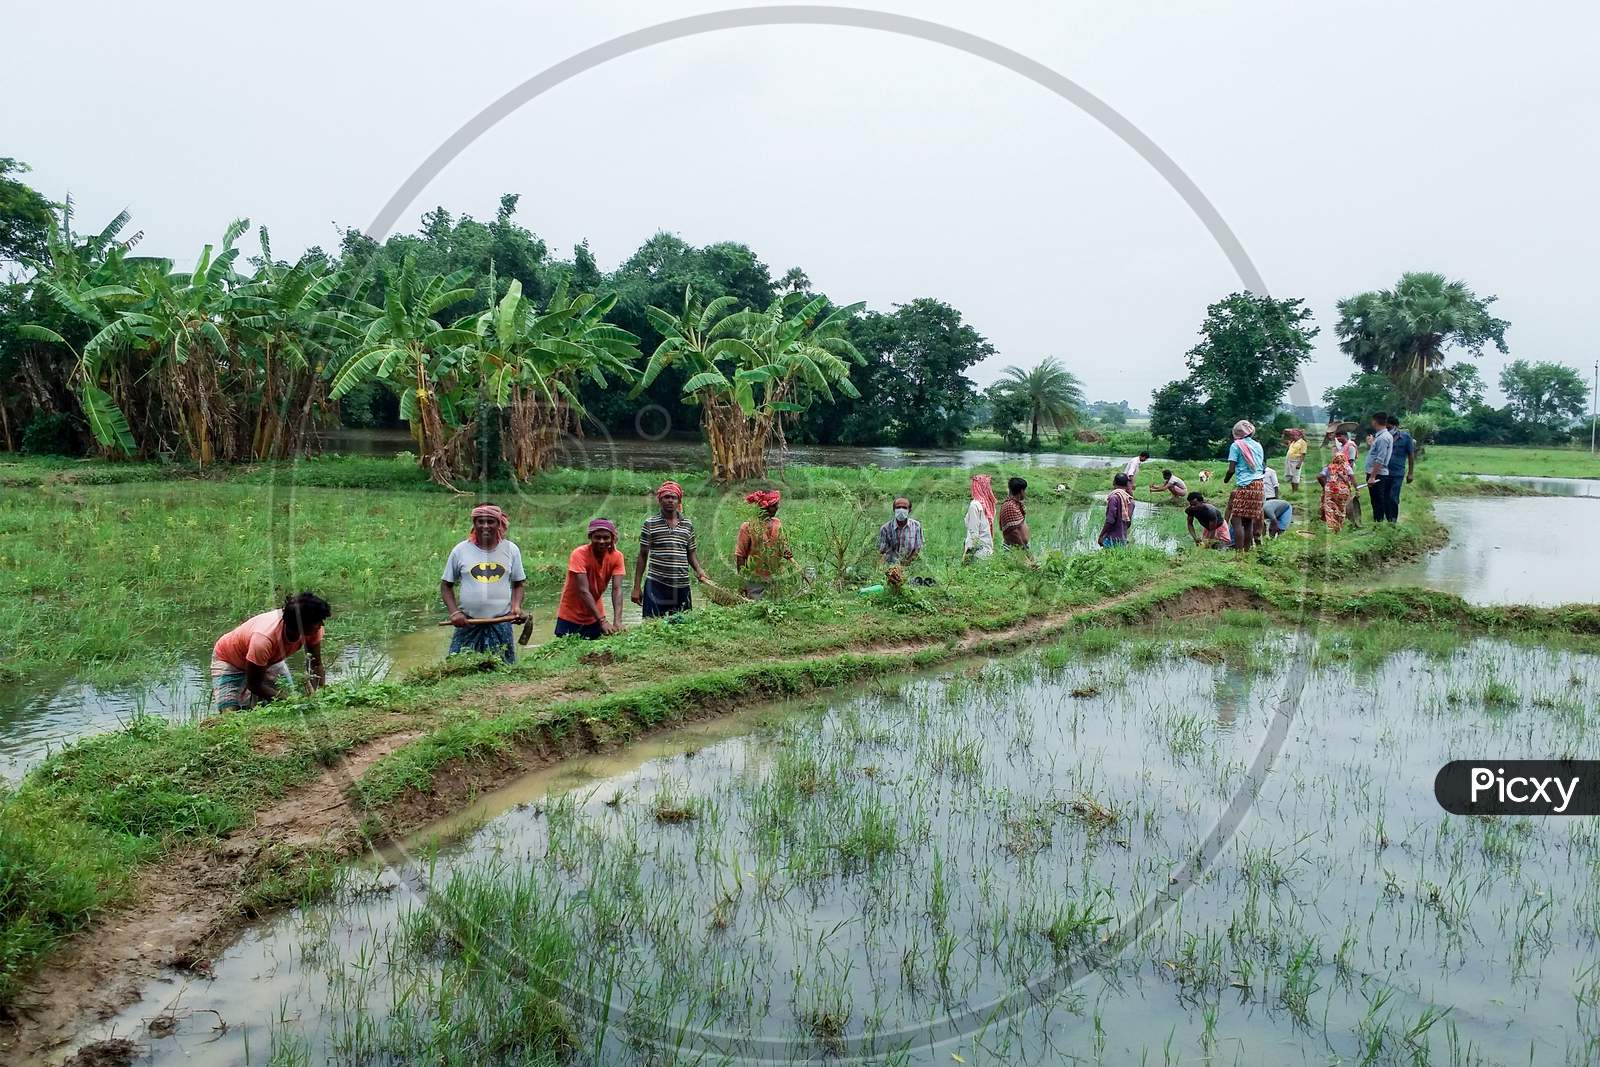 On Rainy Days, Rural Farmers Are Working In The Field In Groups